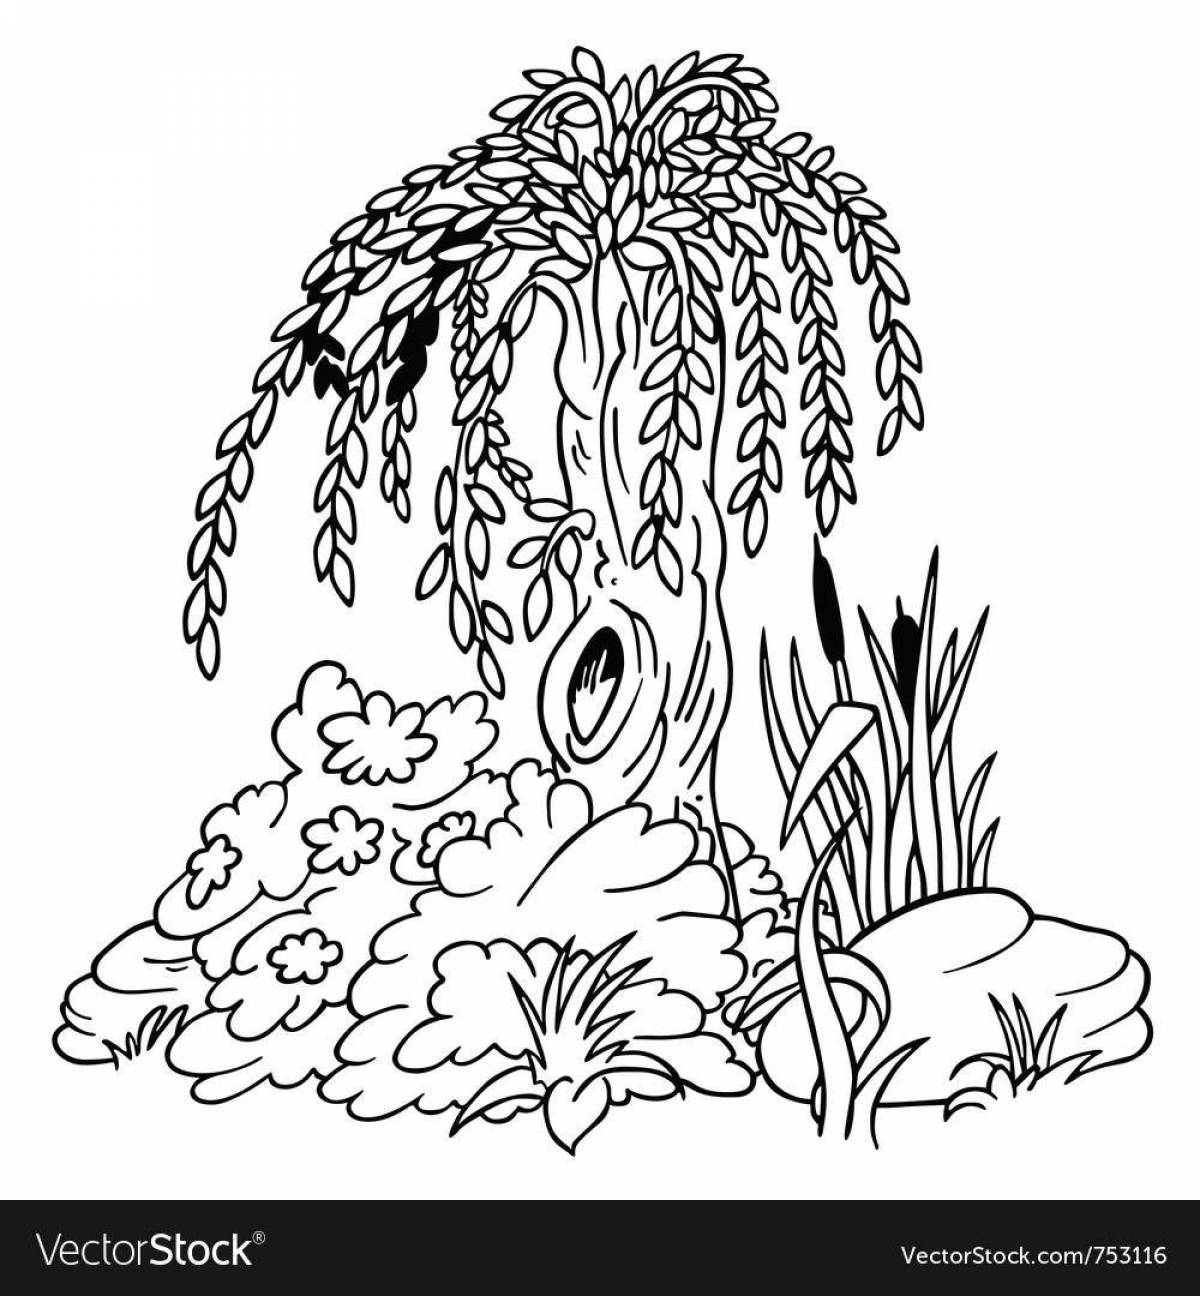 Incredible willow coloring book for kids